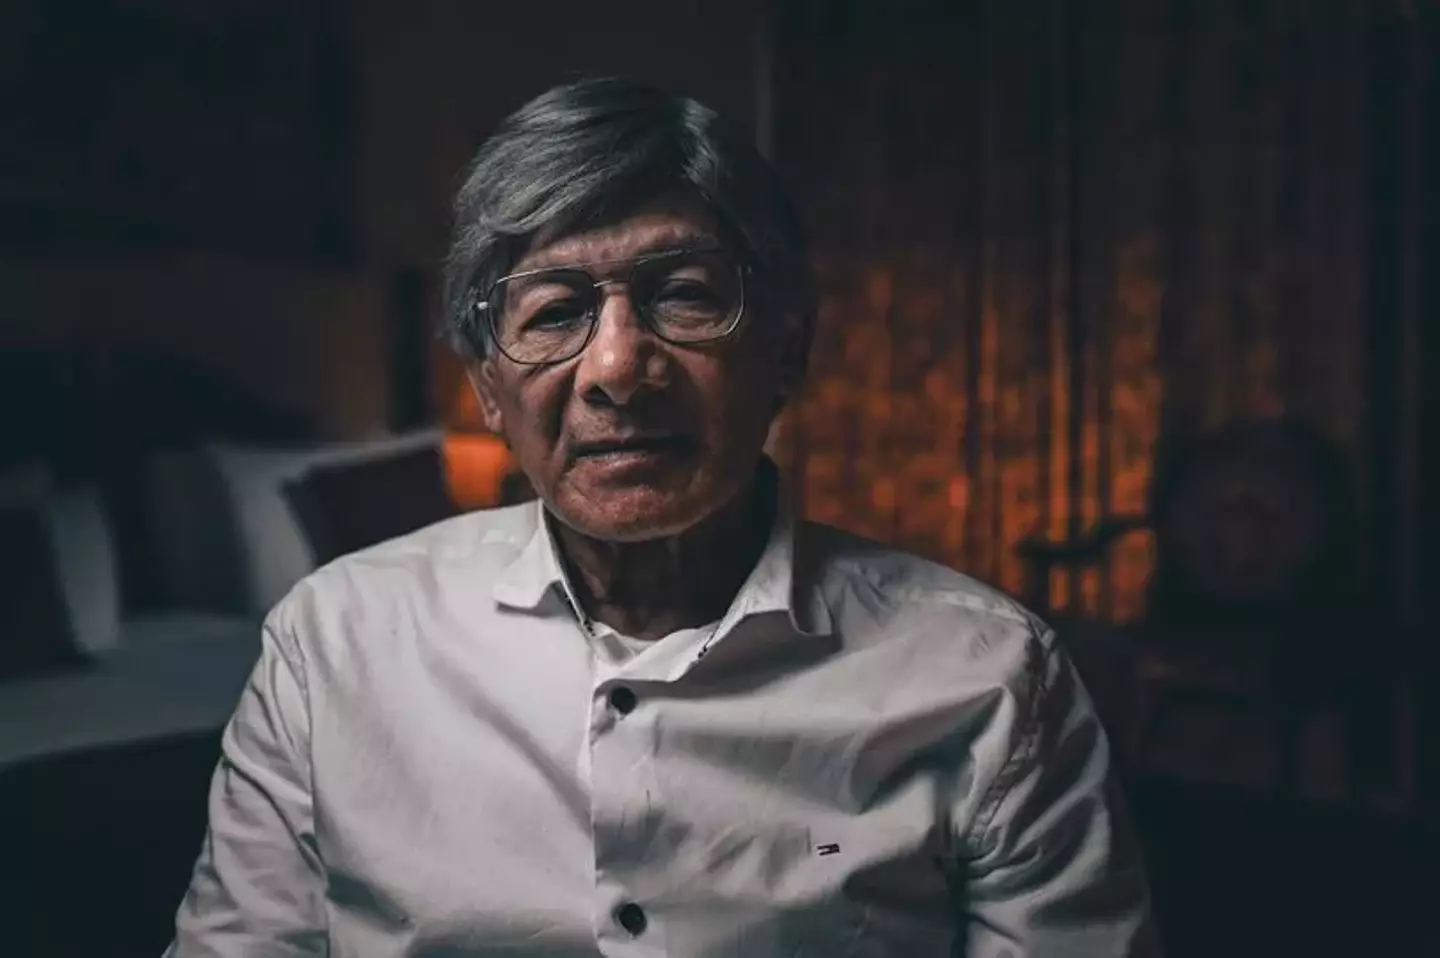 Sobhraj is now aged 79.